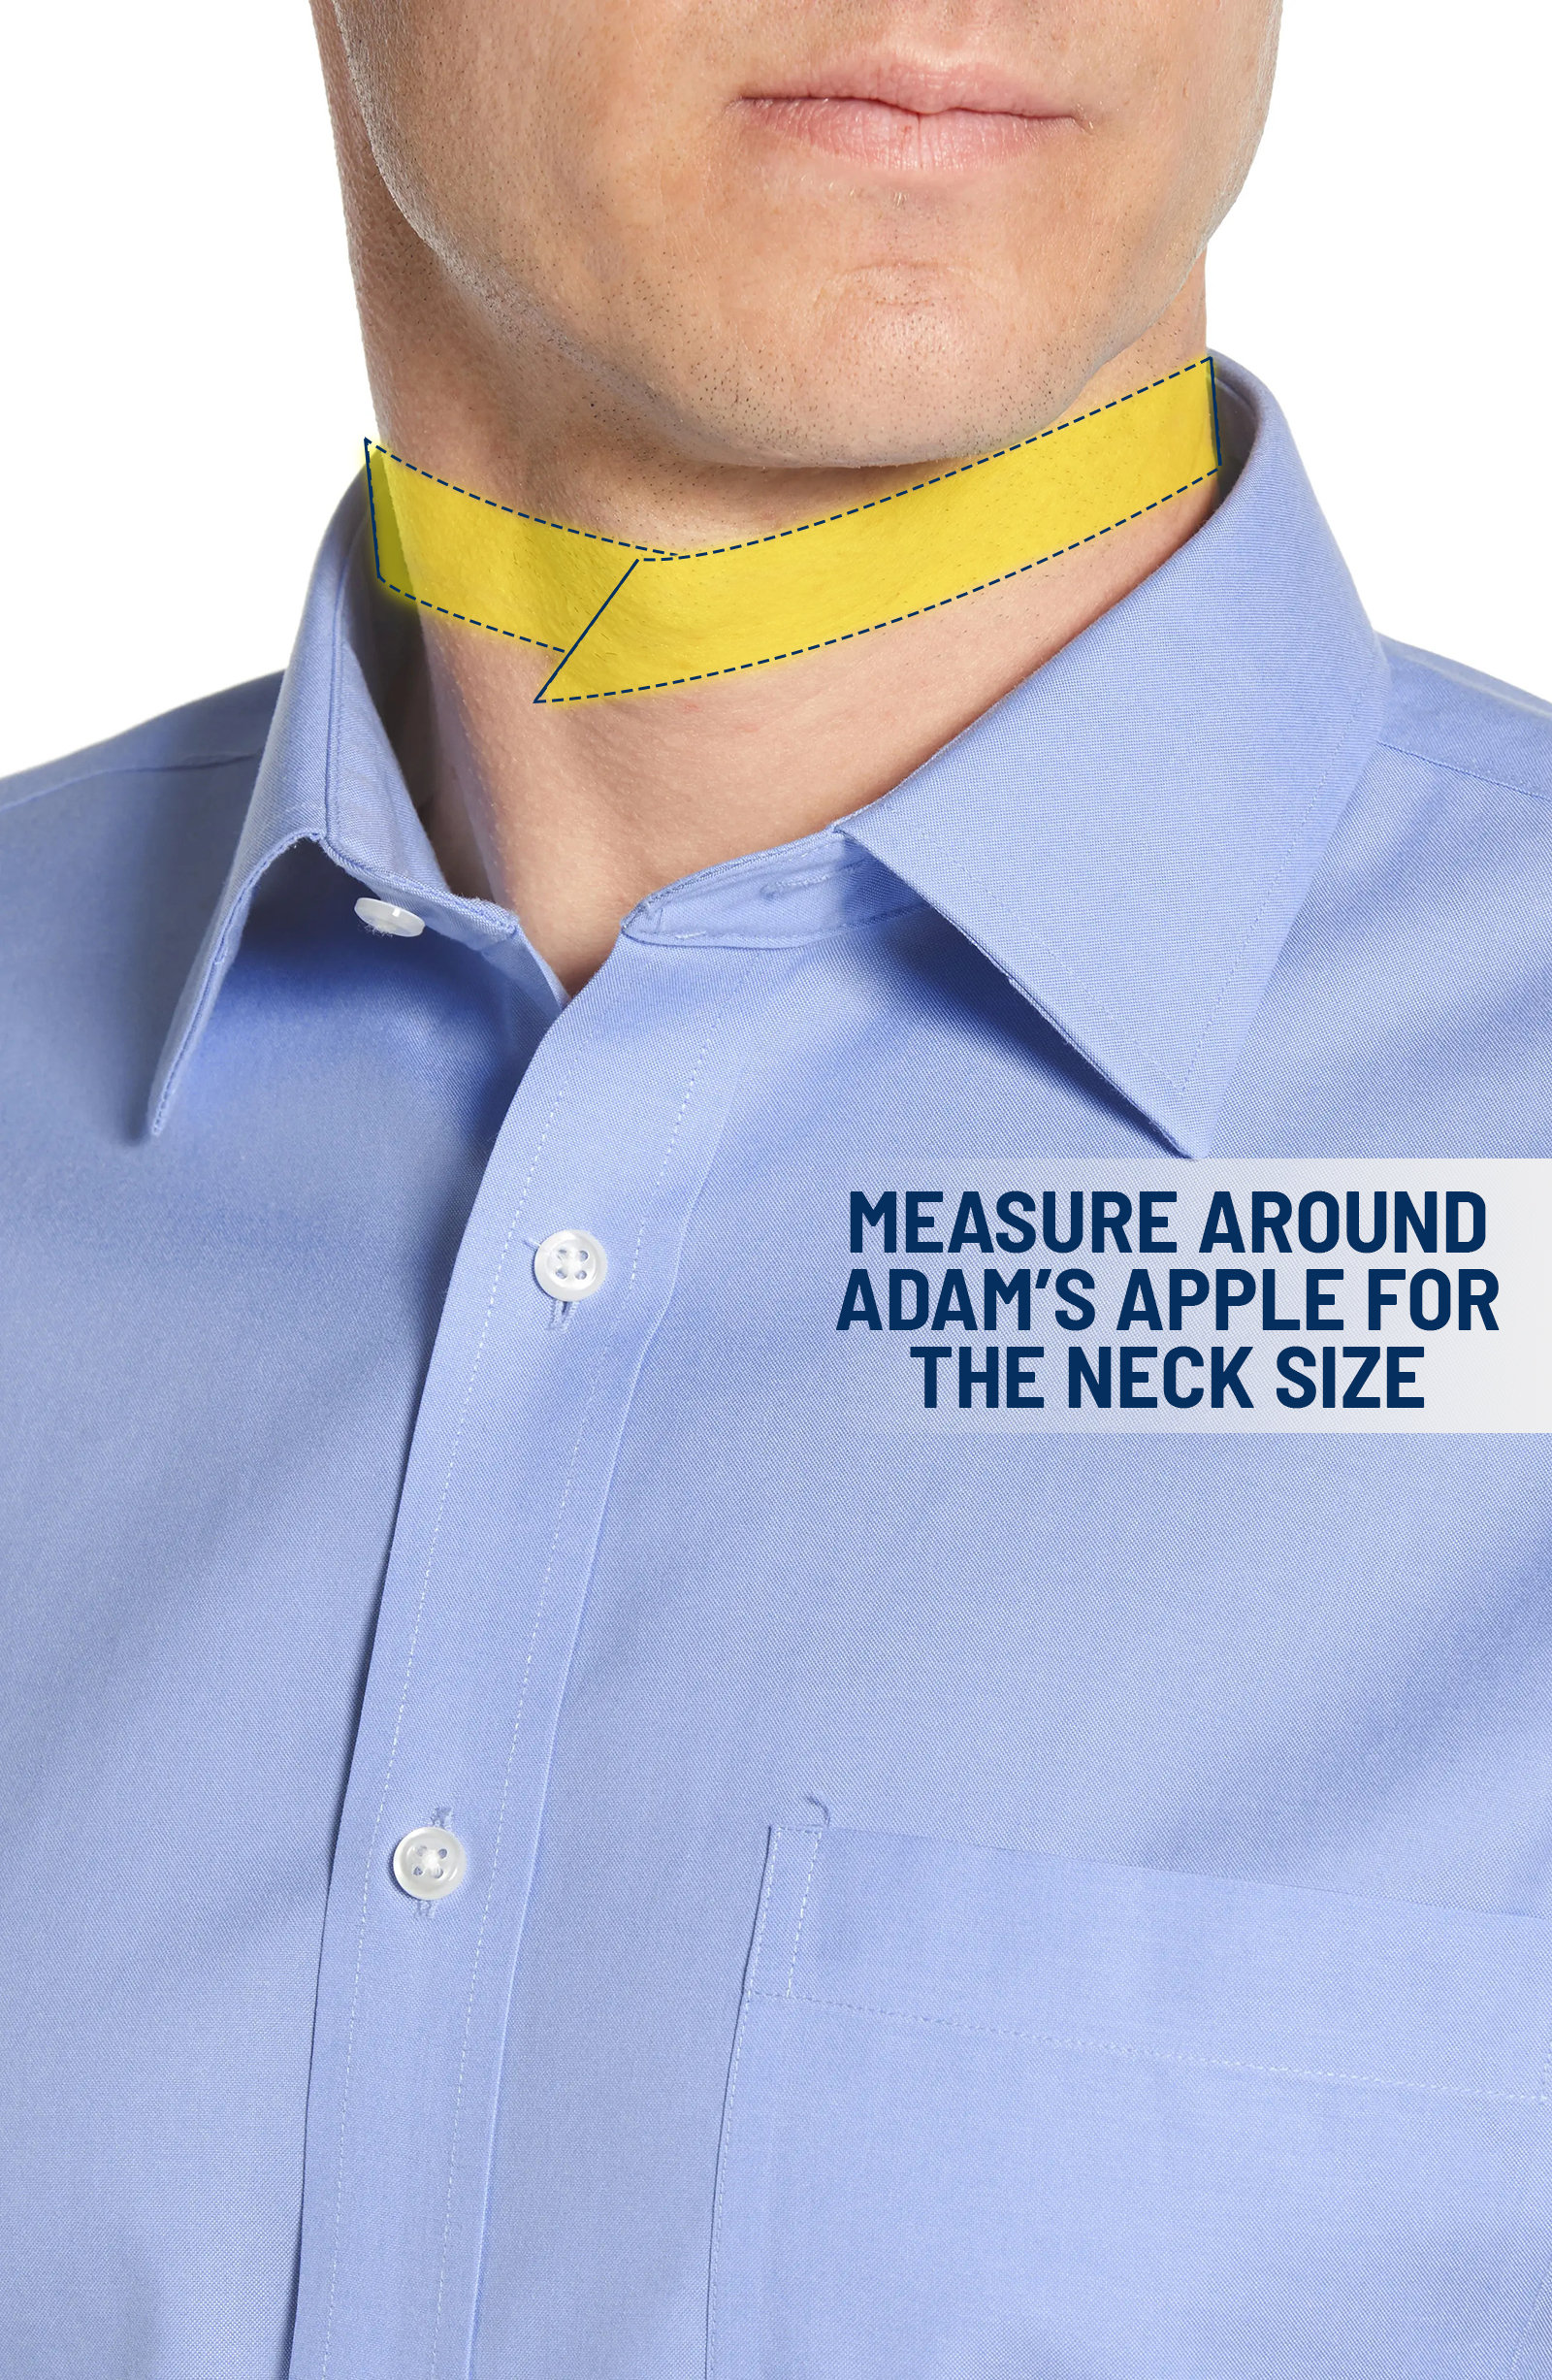 How to measure the neck size for a suit